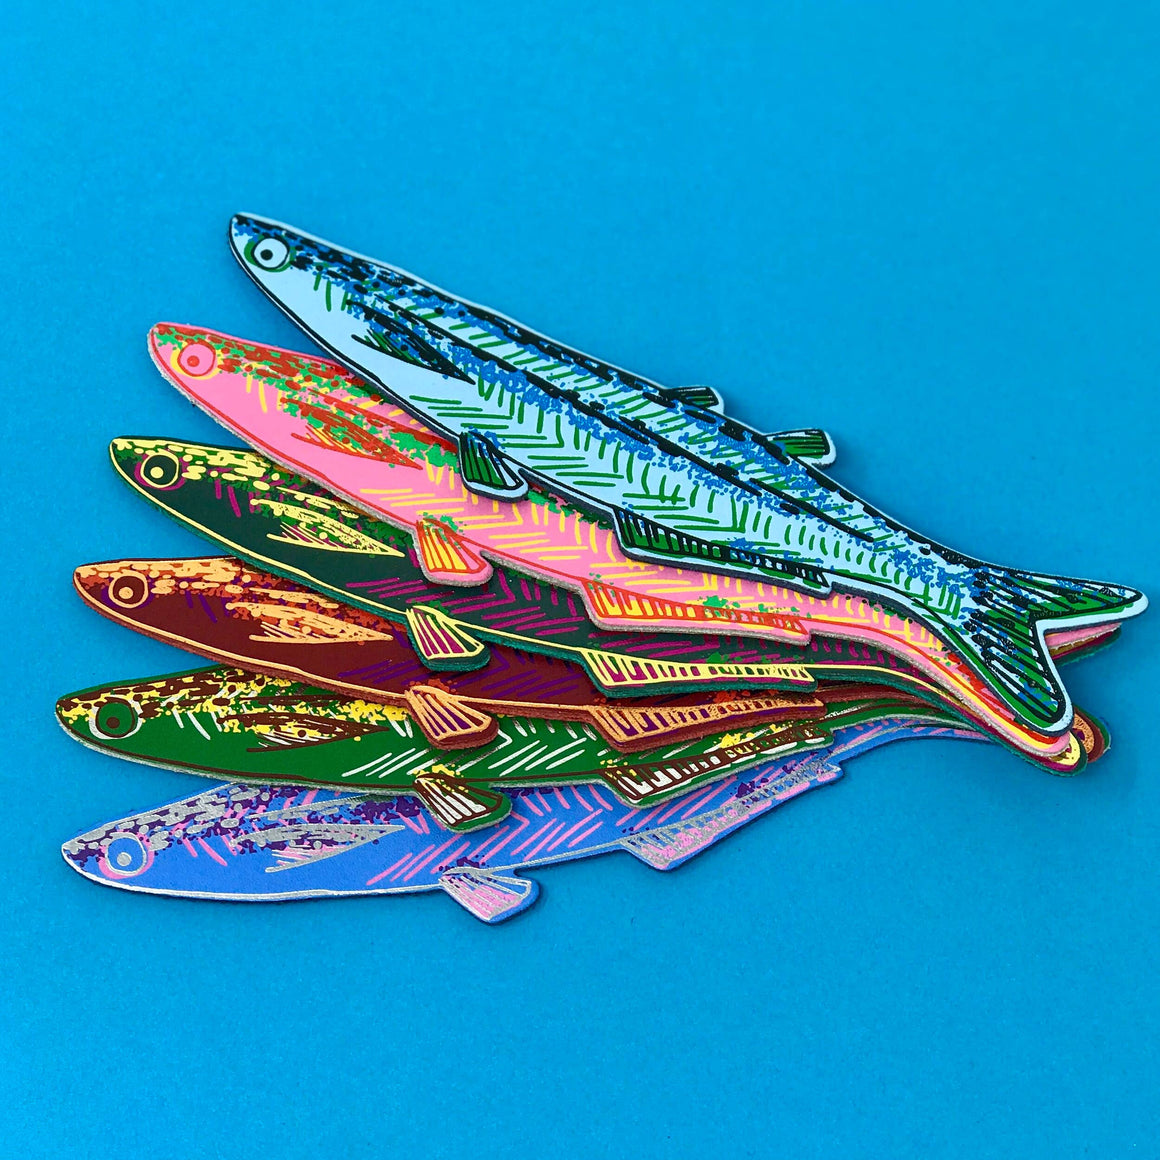 Fish "Any Fin is Possible" Bookmark